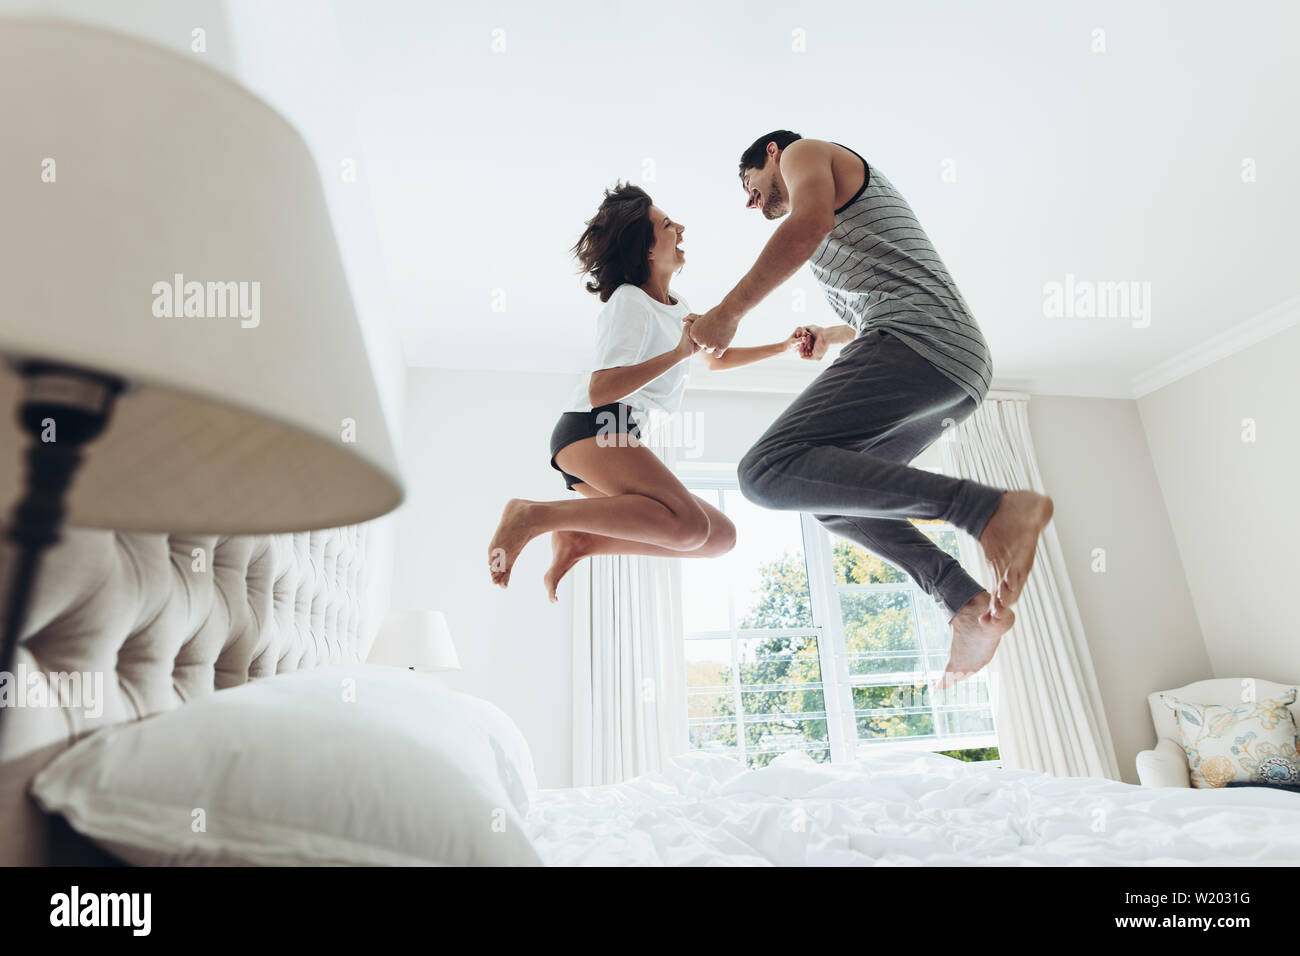 Man and woman holding hands and jumping together on bed. Couple having fun in bedroom. Stock Photo